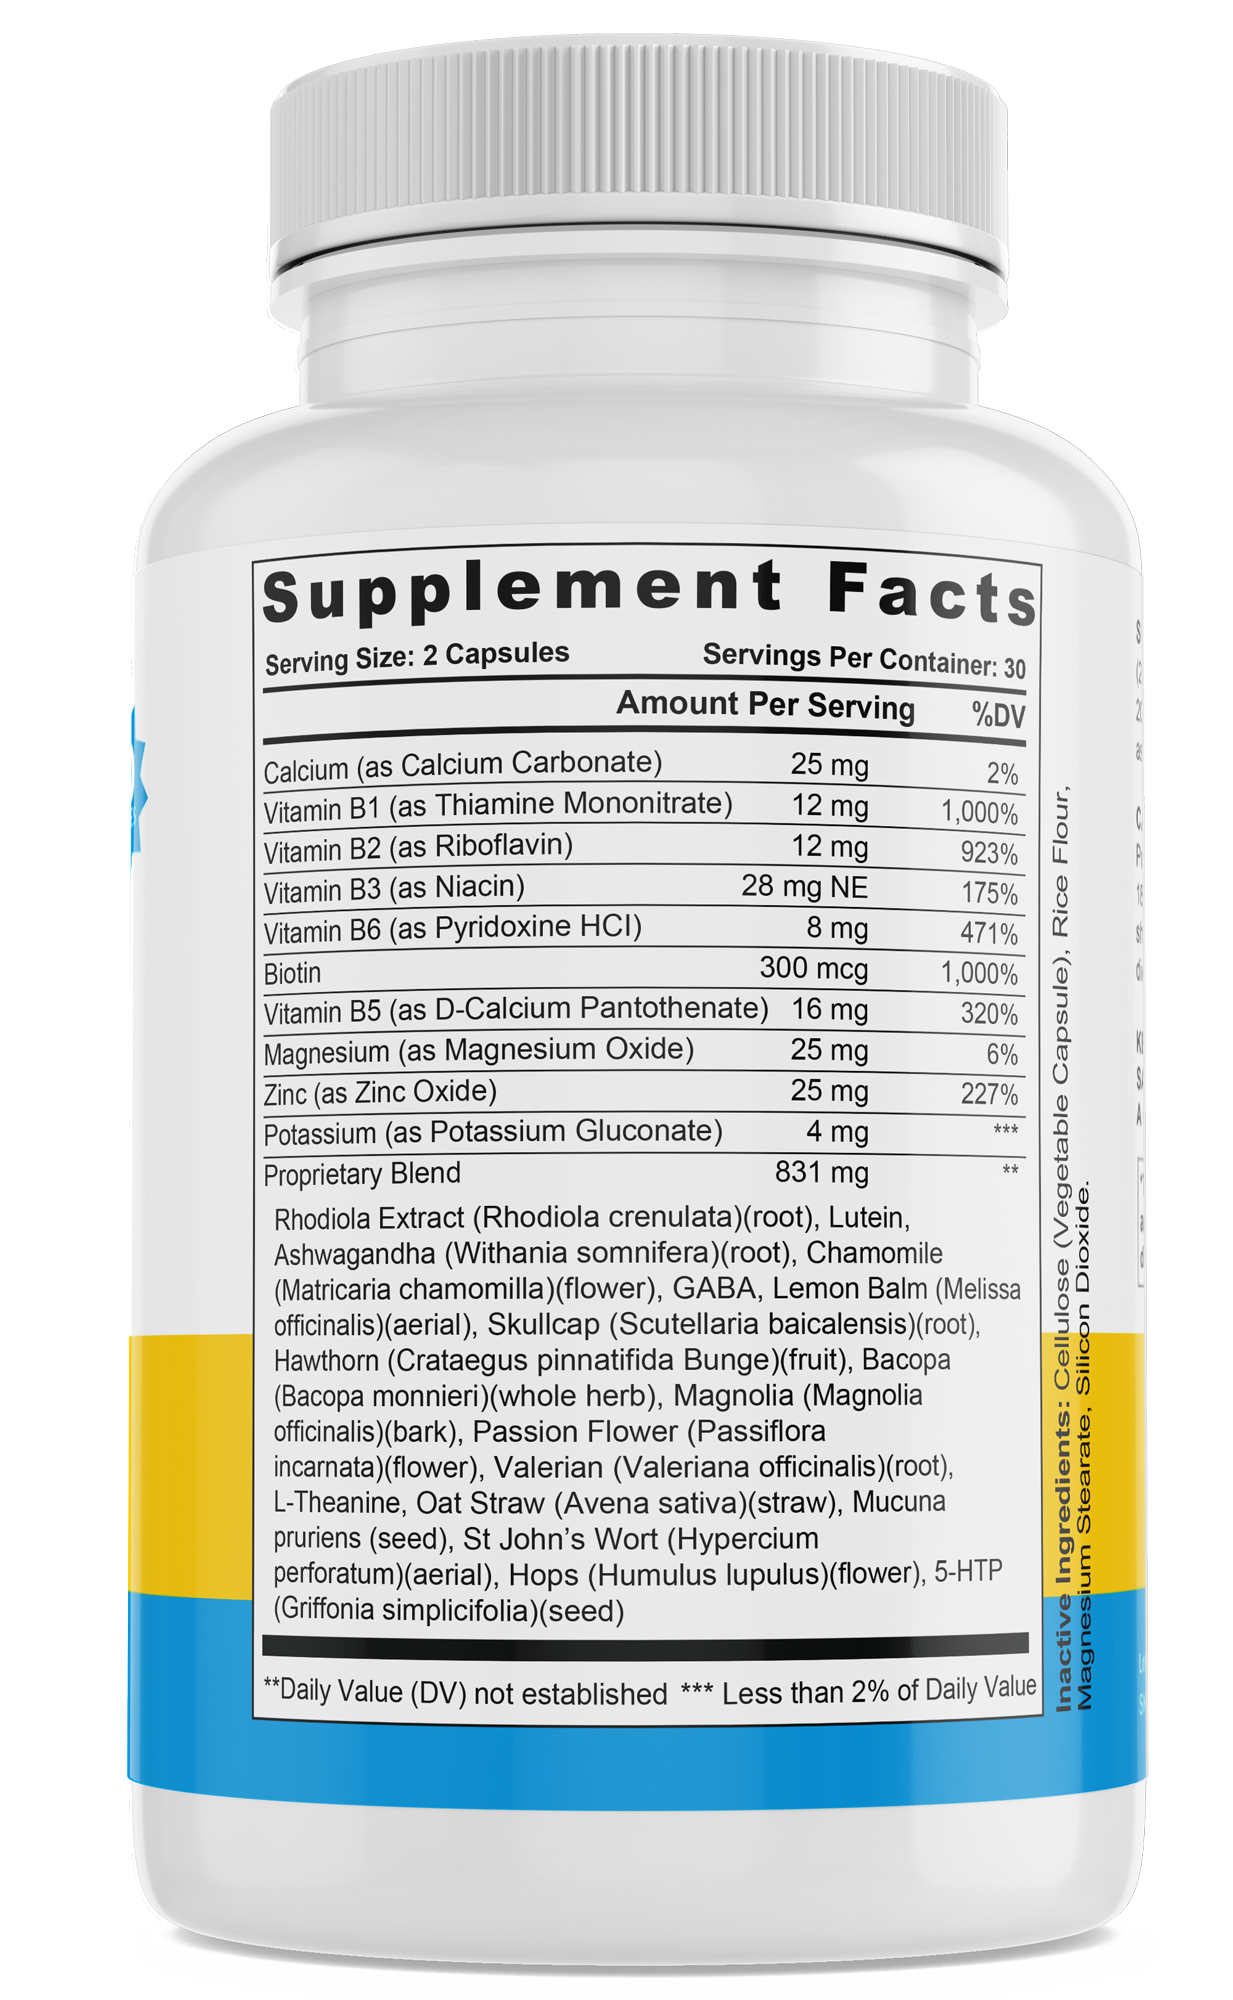 SRS - The Stress Reduction Supplement: 1 Month Supply